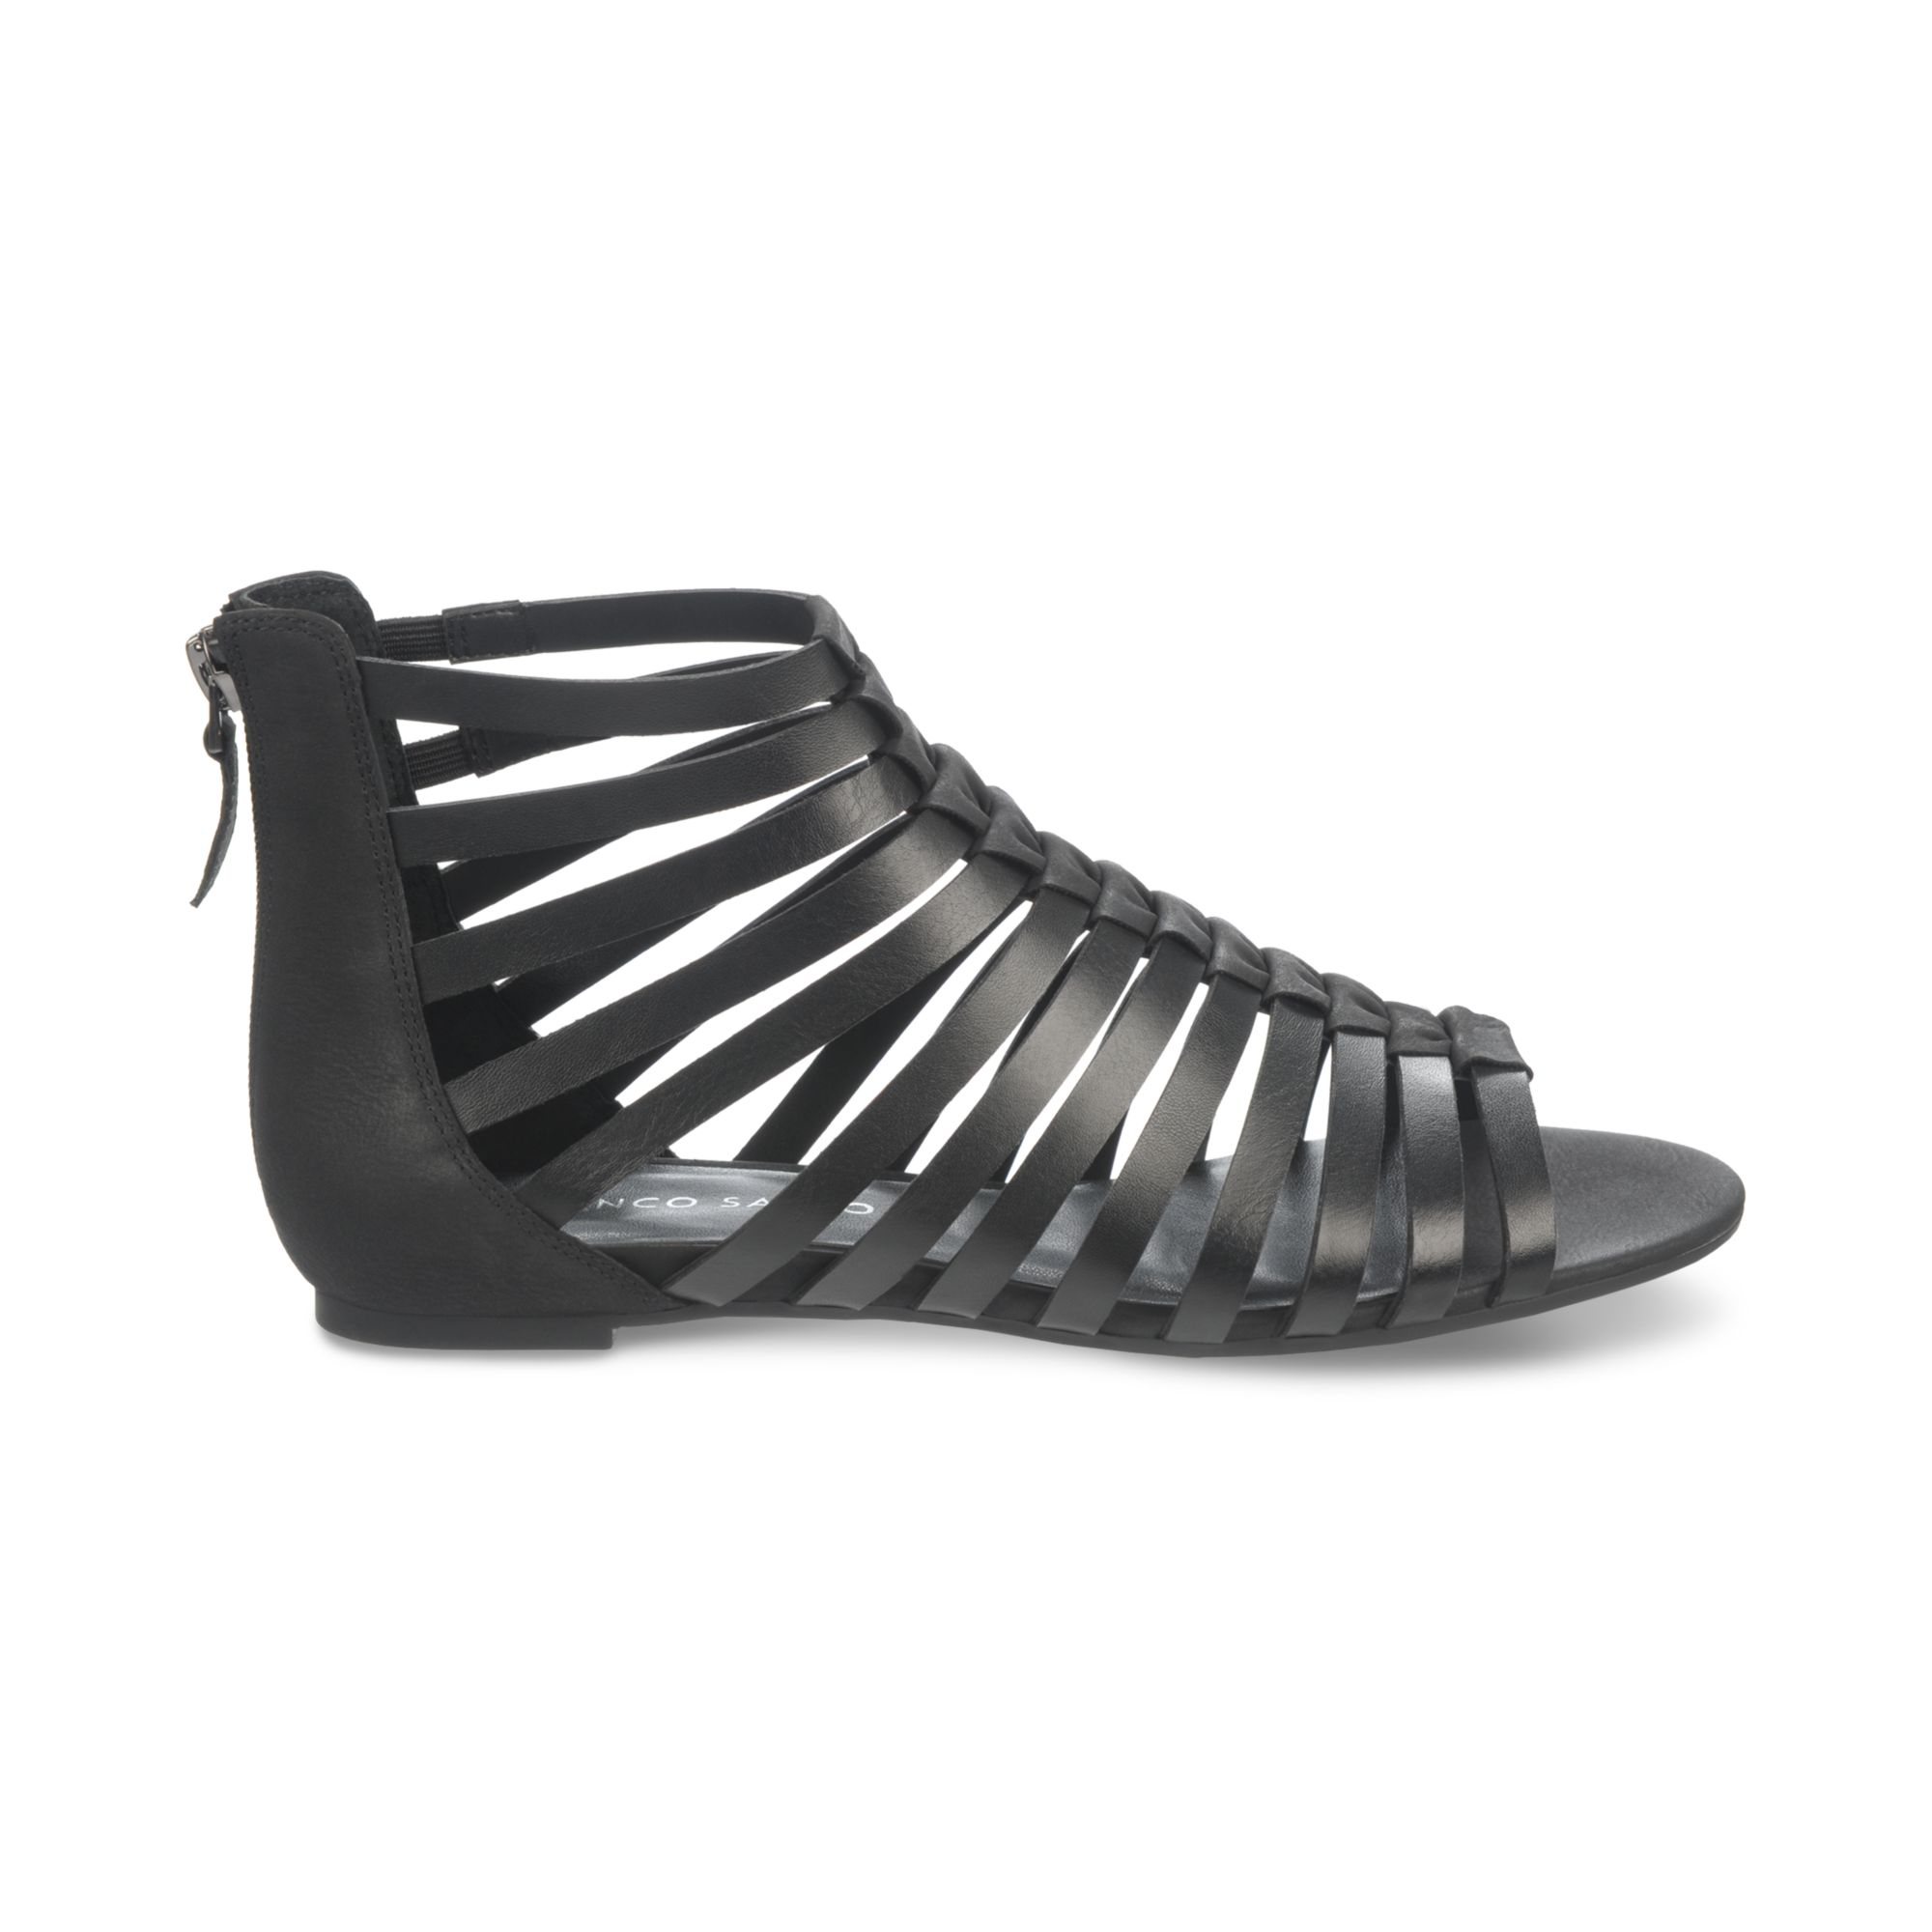 add to your collection. The atrium gladiator sandals by franco sarto ...